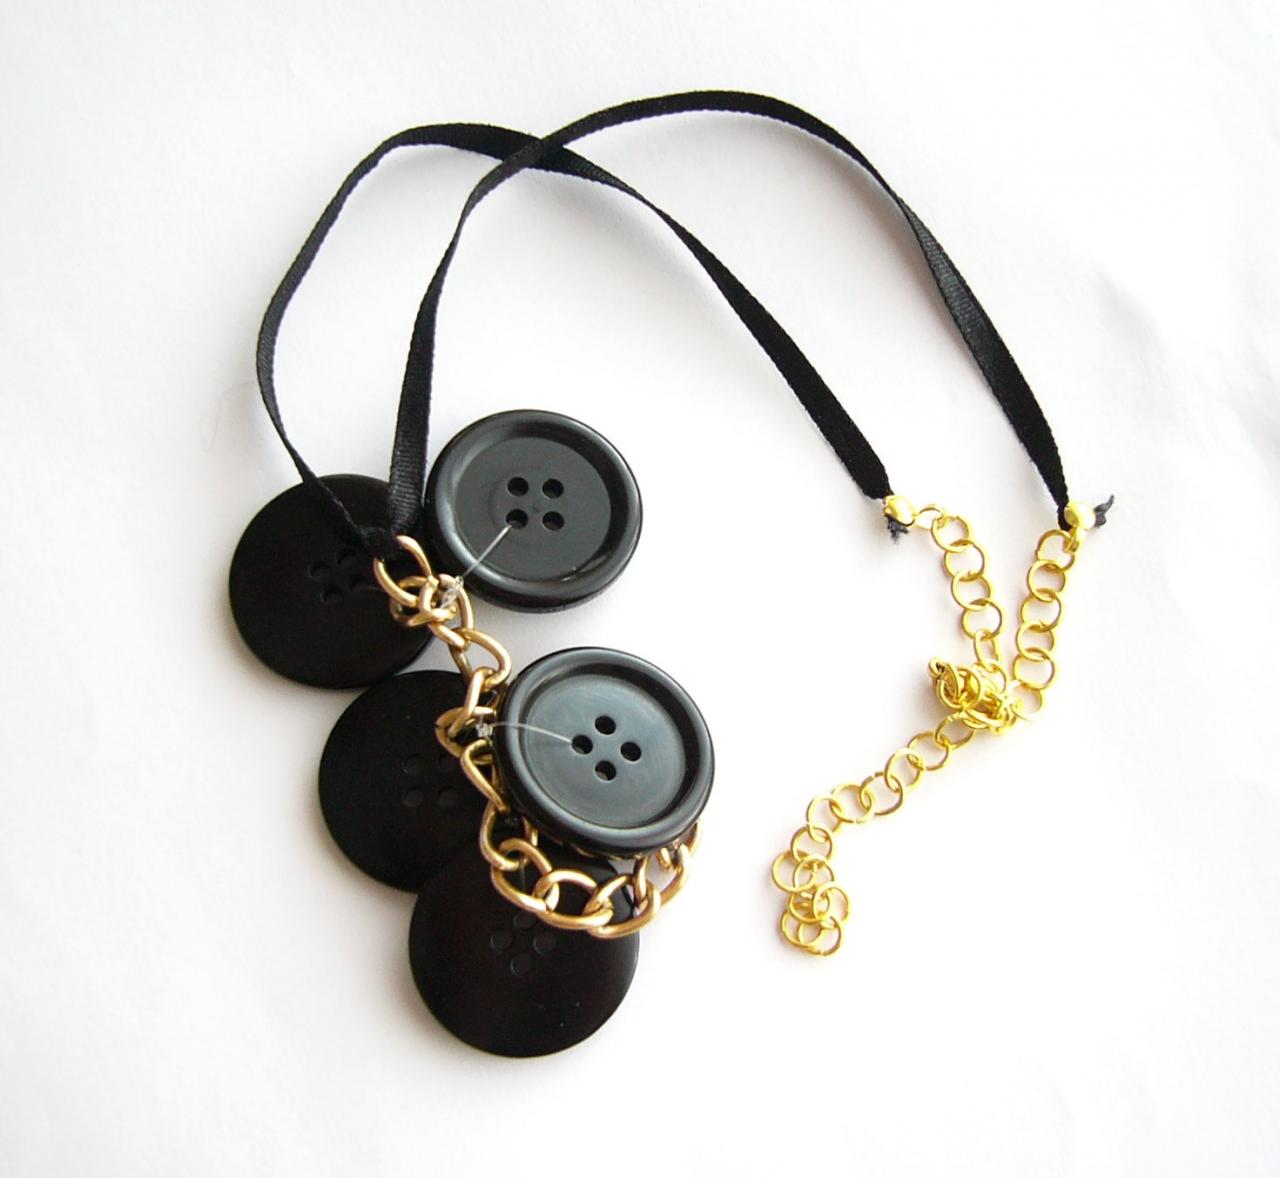 Black Necklace Handmade Of Large Vintage Buttons And Golden Chains, Upcycled Jewelry, Recycled, Repurposed, Handcrafted, Ooak, Gothic